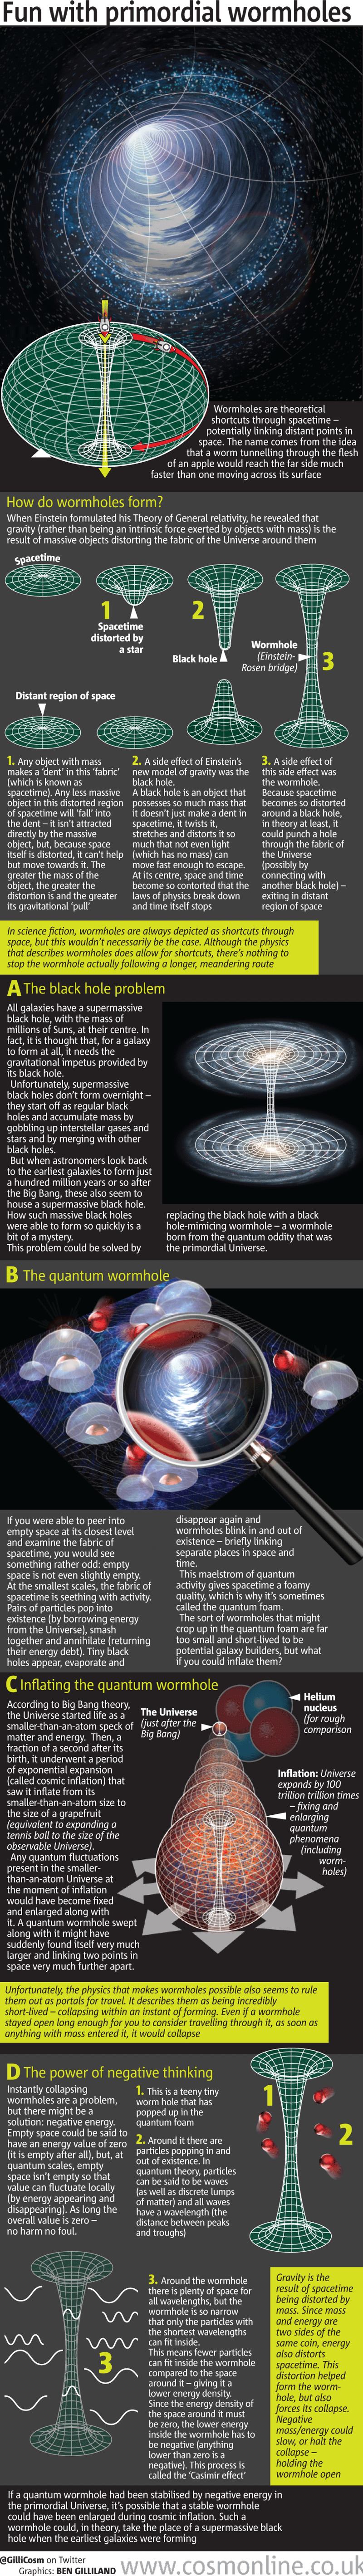 Black hole? Or wormhole in disguise? | CosmOnline